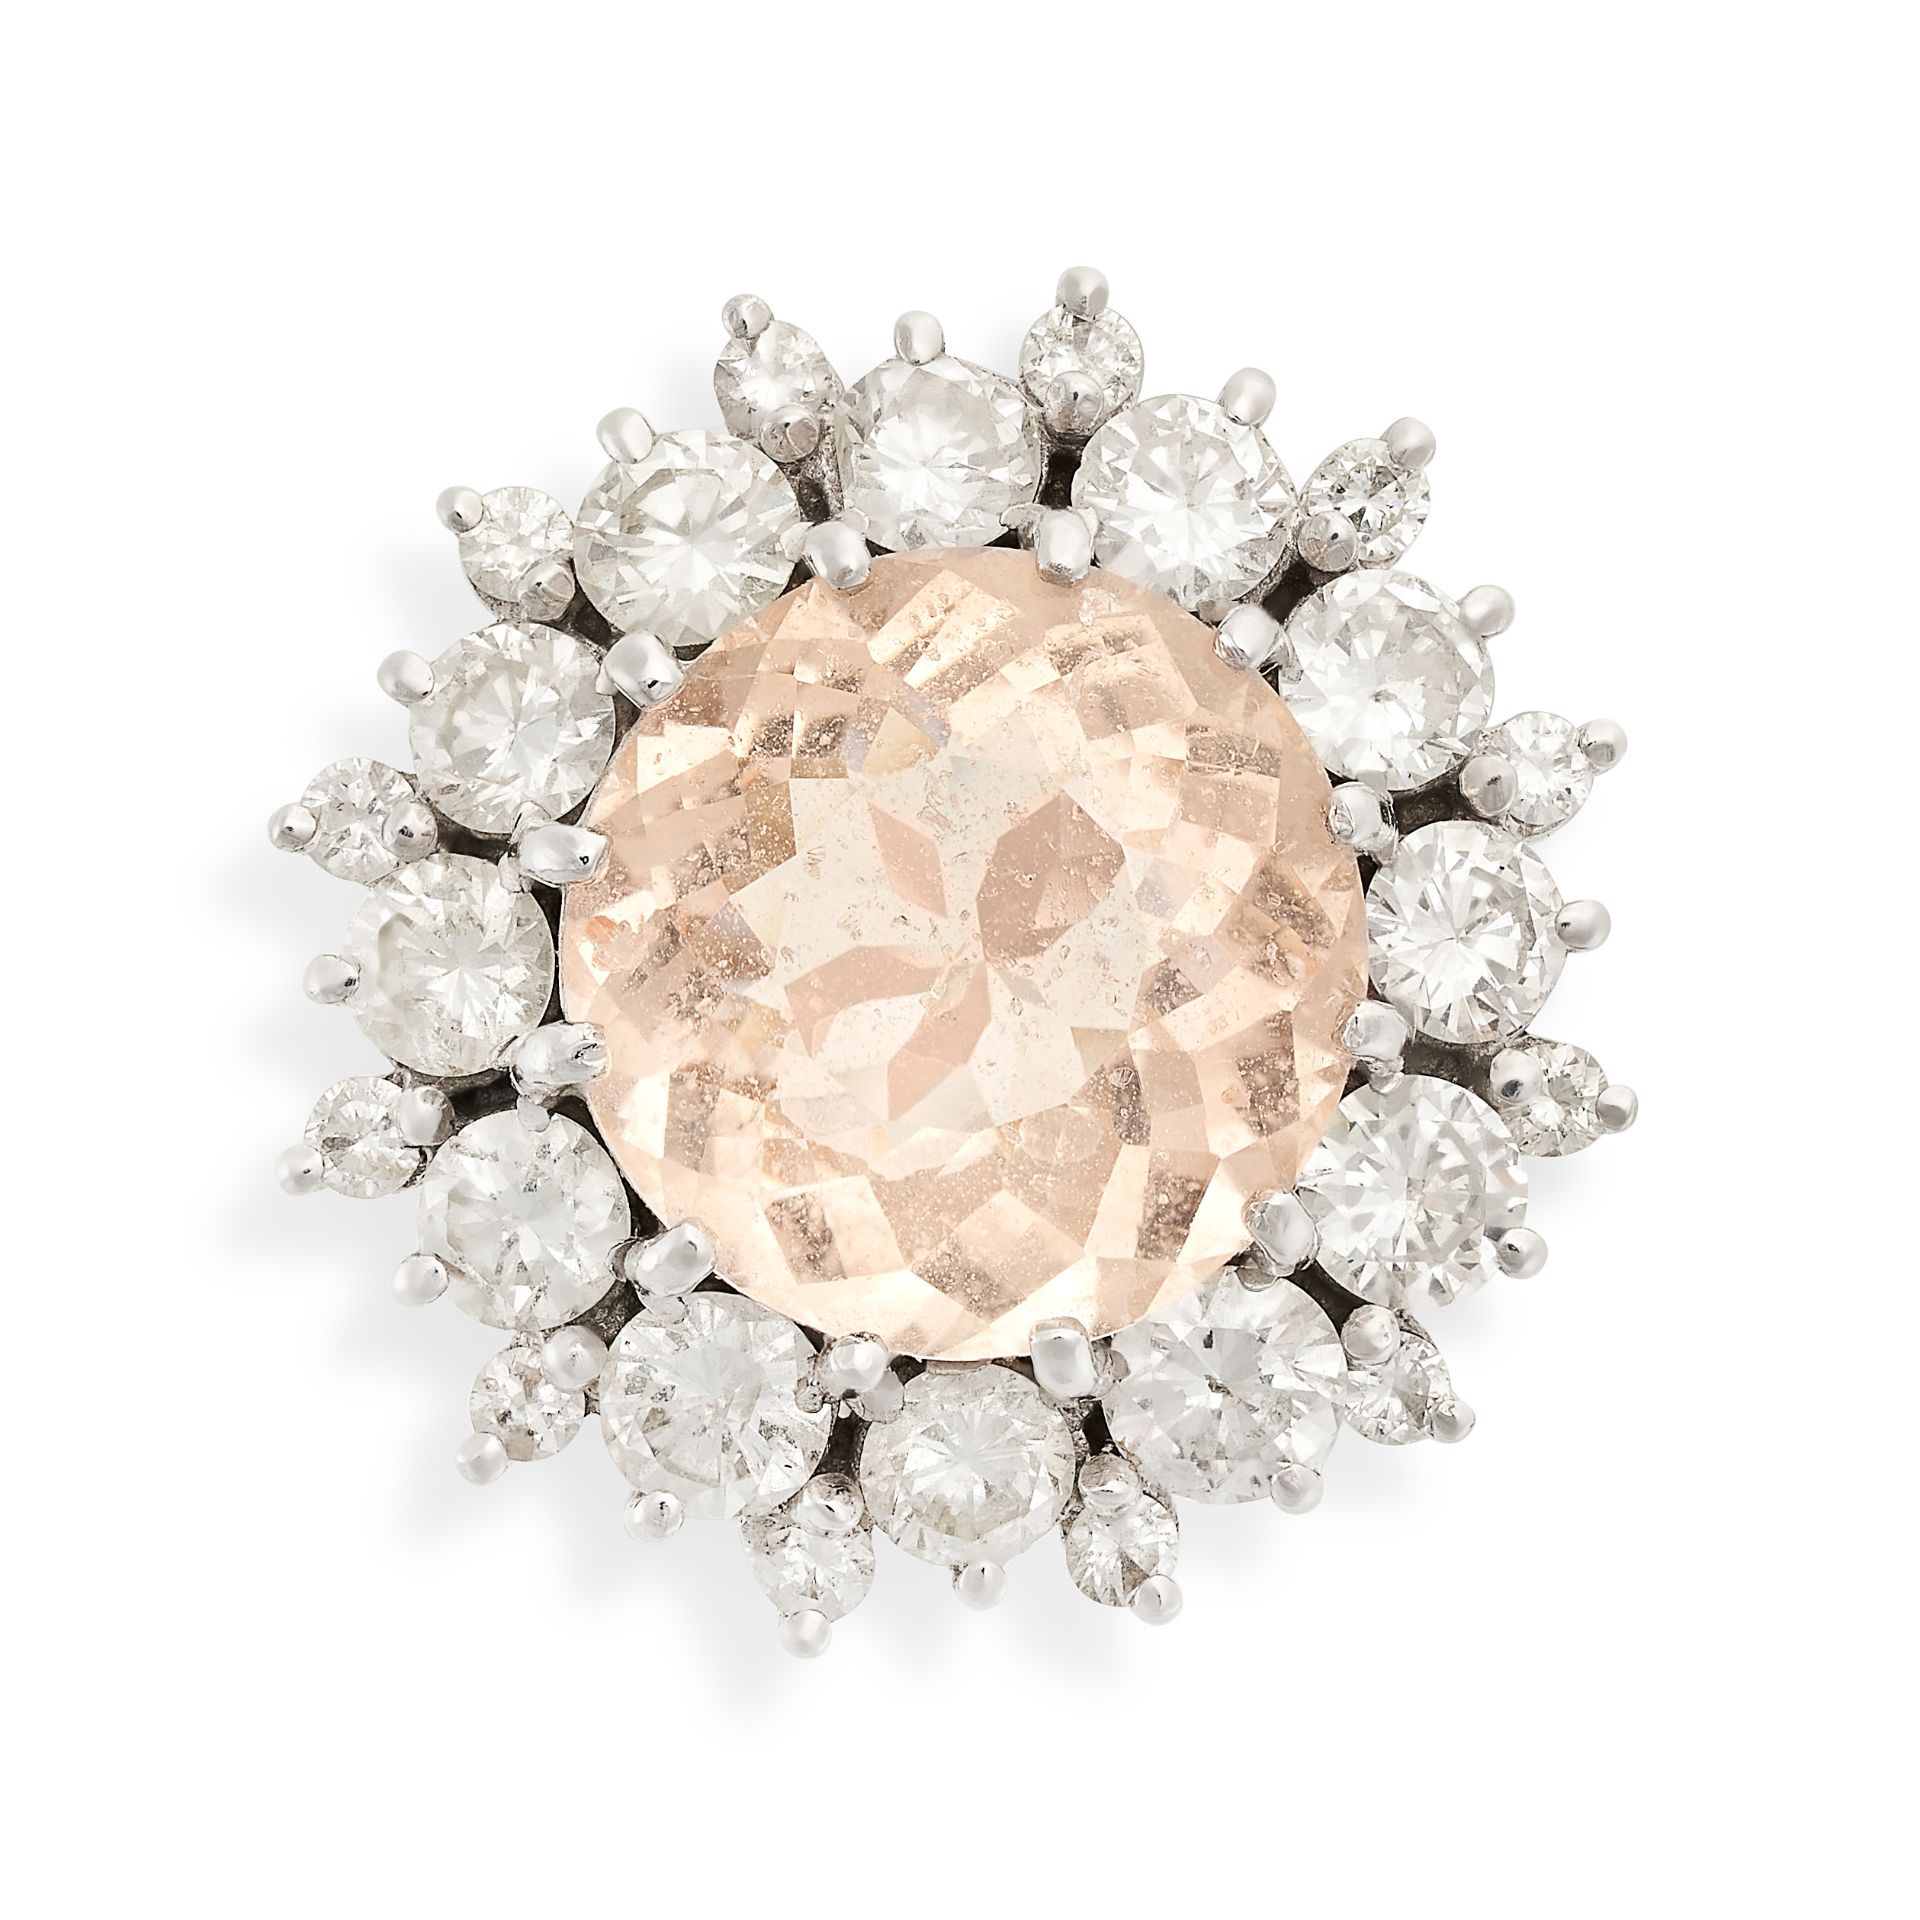 A MORGANITE AND DIAMOND CLUSTER RING set with a round cut morganite of 3.91 carats in a cluster of